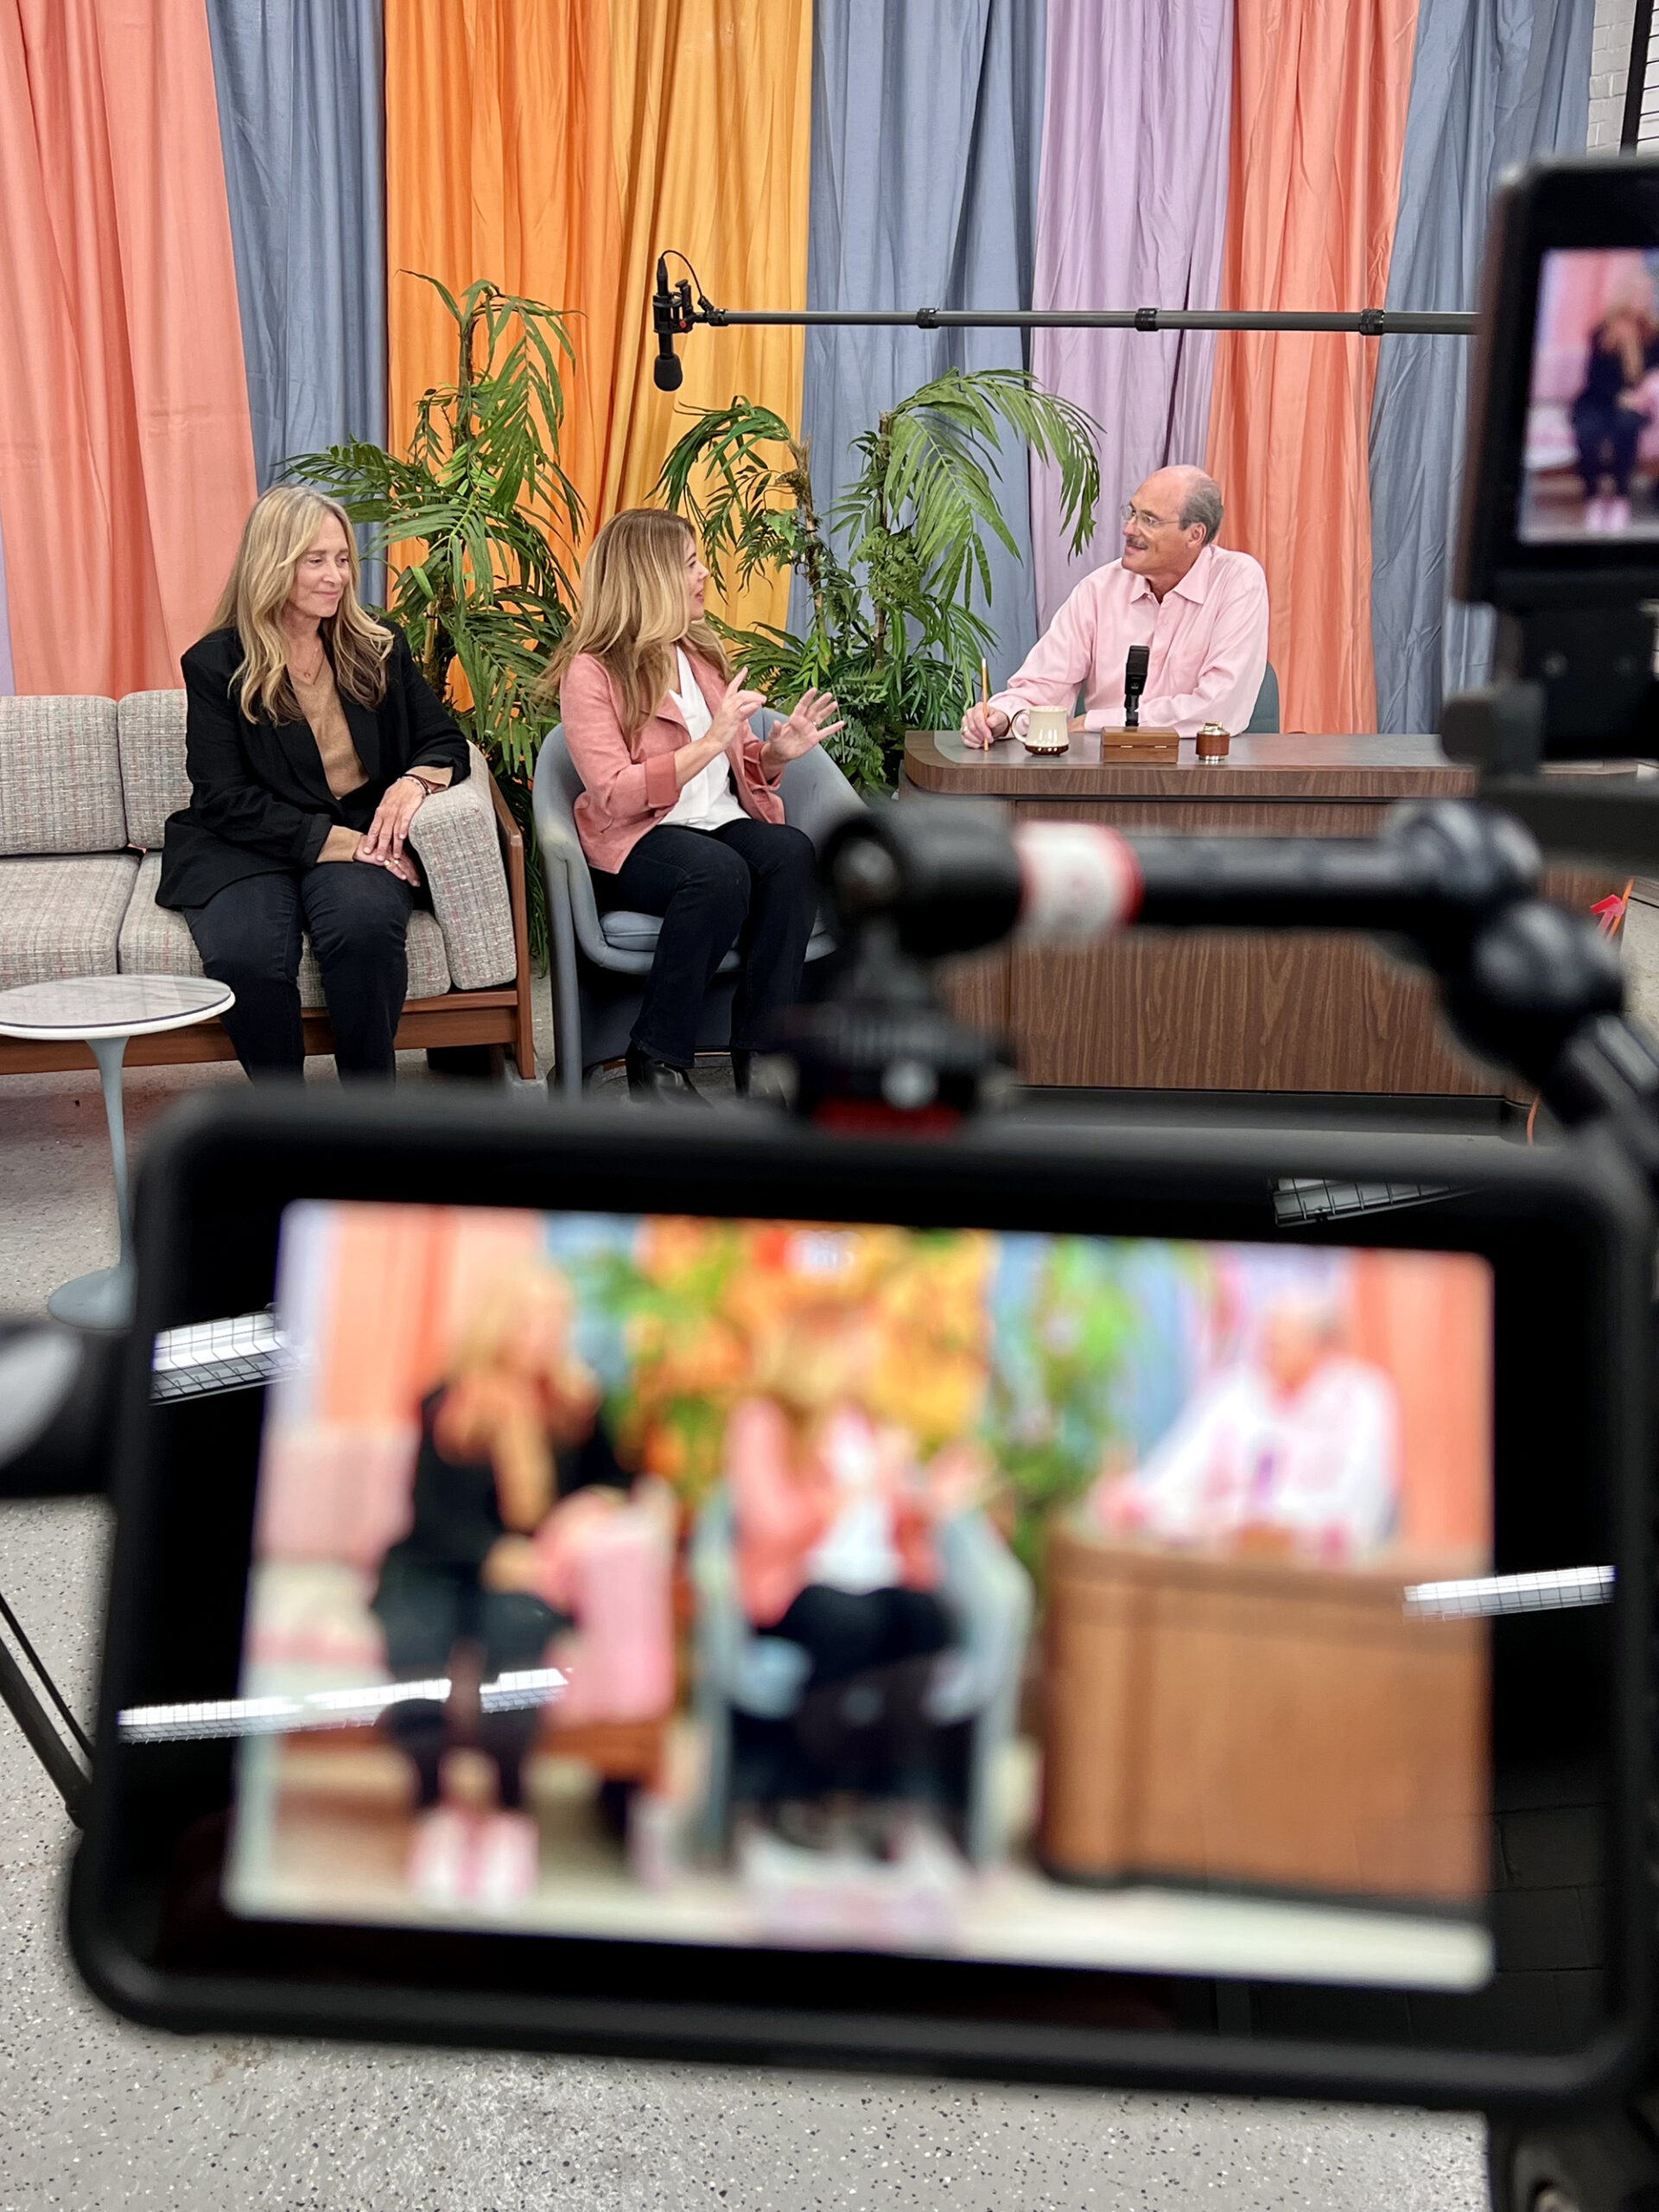 image from the Season 5 premiere of MeTV's "Collector's Call." In the background, seated left-to-right, are expert Marcia Tysseling and host Lisa Whelchel in chairs, and collector Stewart Berkowitz seated behind a desk on the original set of "The Tonight Show Starring Johnny Carson." In the foreground of the image, we are looking at them through the viewfinder of a video camera.